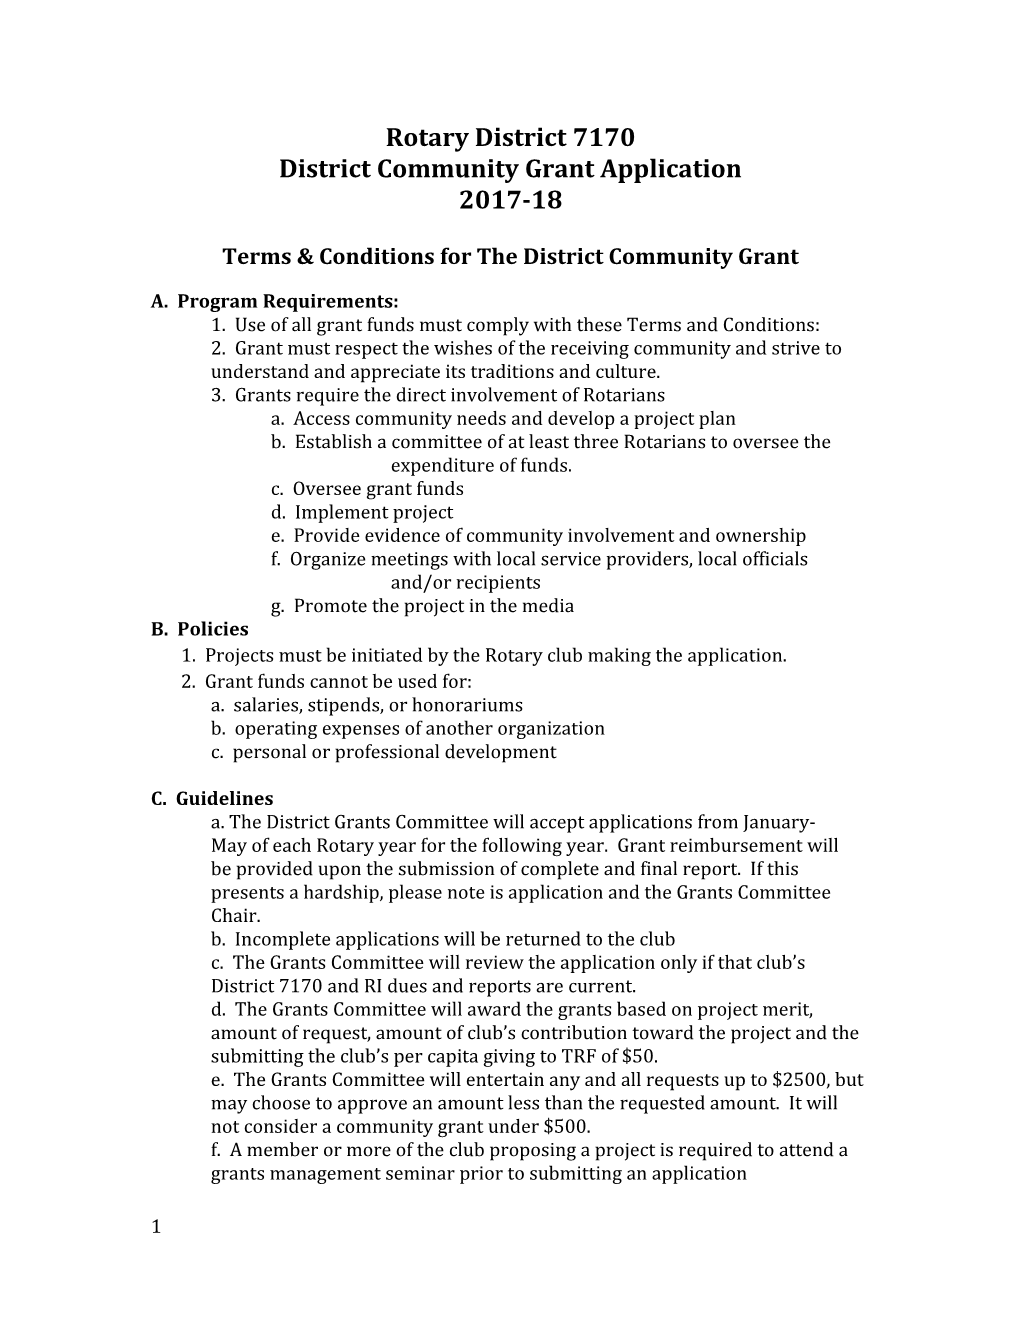 Terms & Conditions for the District Community Grant